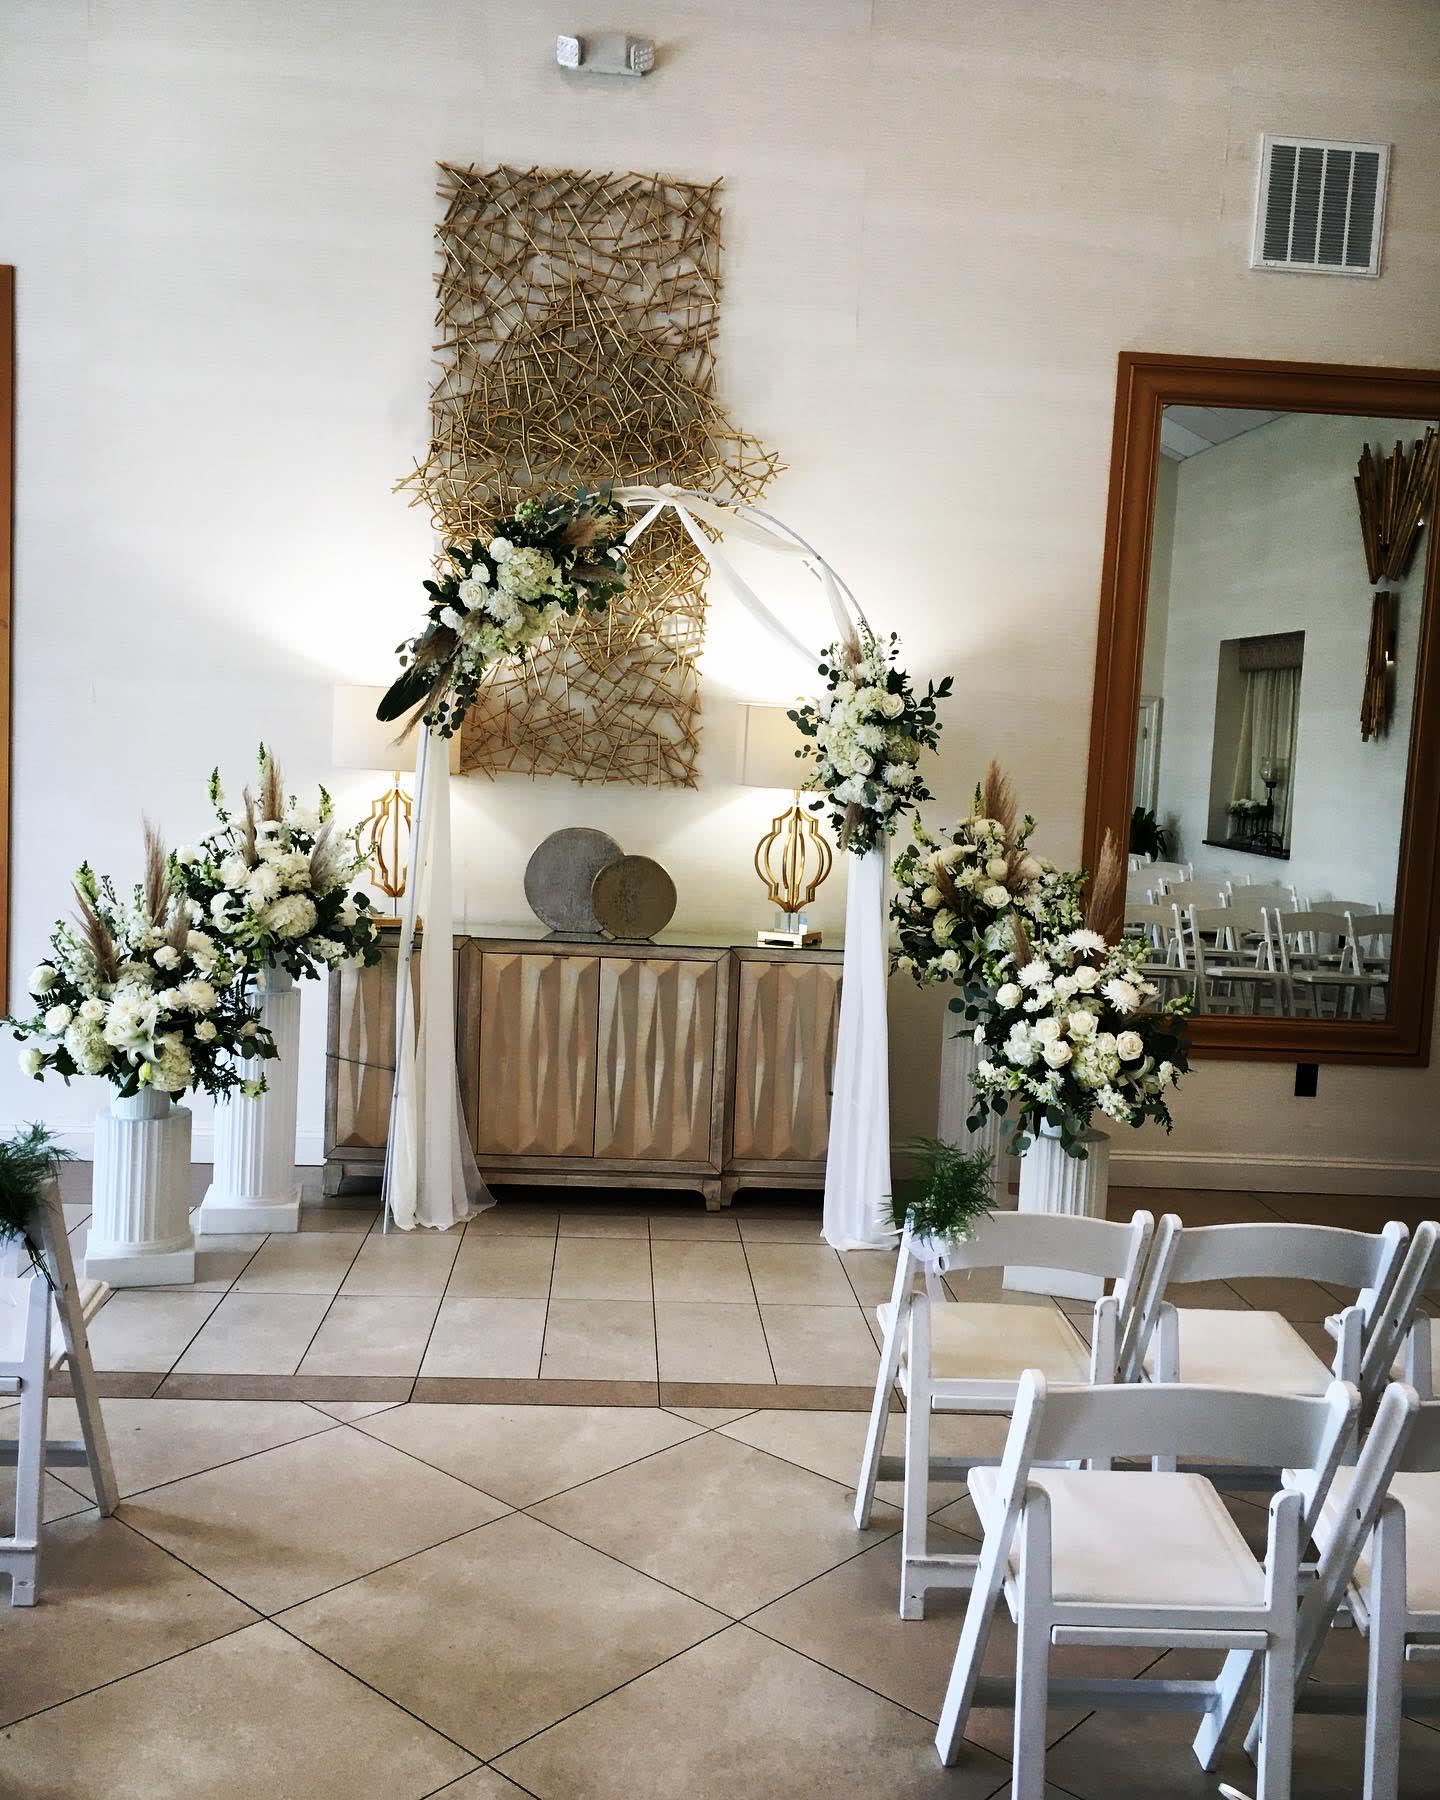 Wedding ceremony package  - All white seasonal flowers. Includes 4 baskets , 2 flower pieces for arch and ivory / white fabric  ( metal arch not included) and rental and retrieval of white columns 